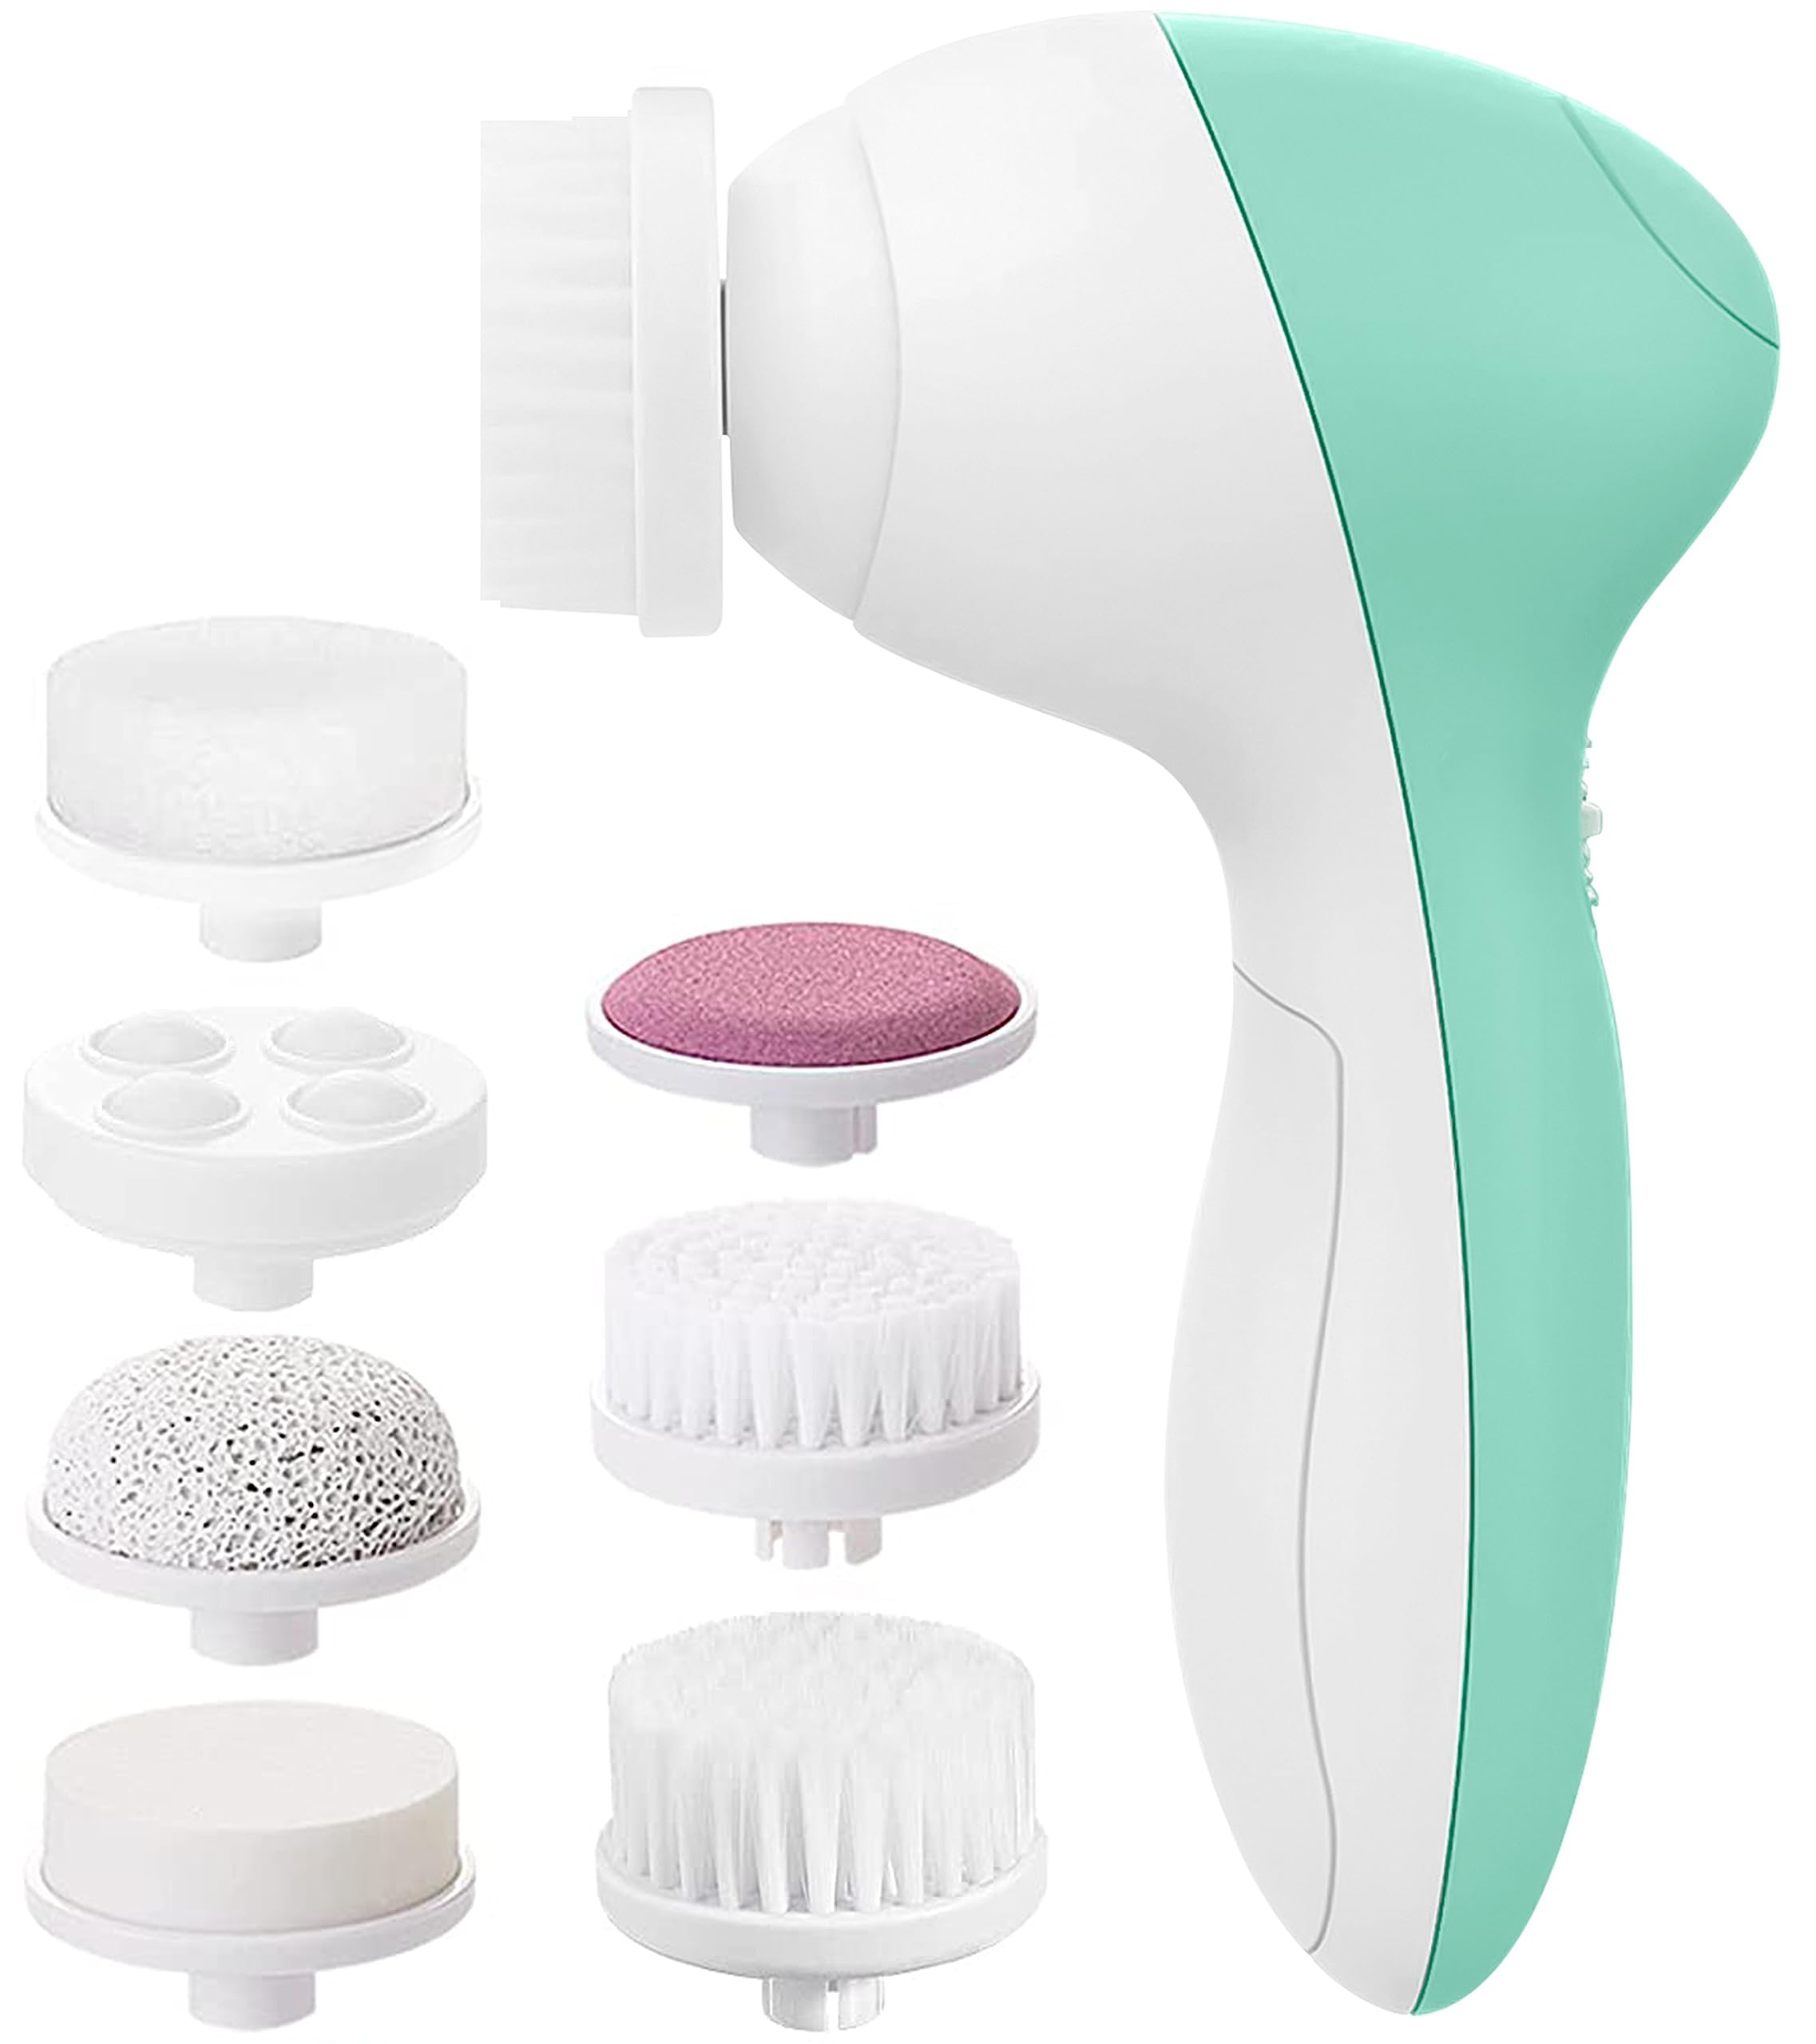 Face Scrubber | Facial Cleansing Brush Exfoliator Skin Care Beauty Products Powered Electric Wash Exfoliating Skincare Women Spin Cleanser Tools Cleaning Scrub Washer Self Care (Opal)